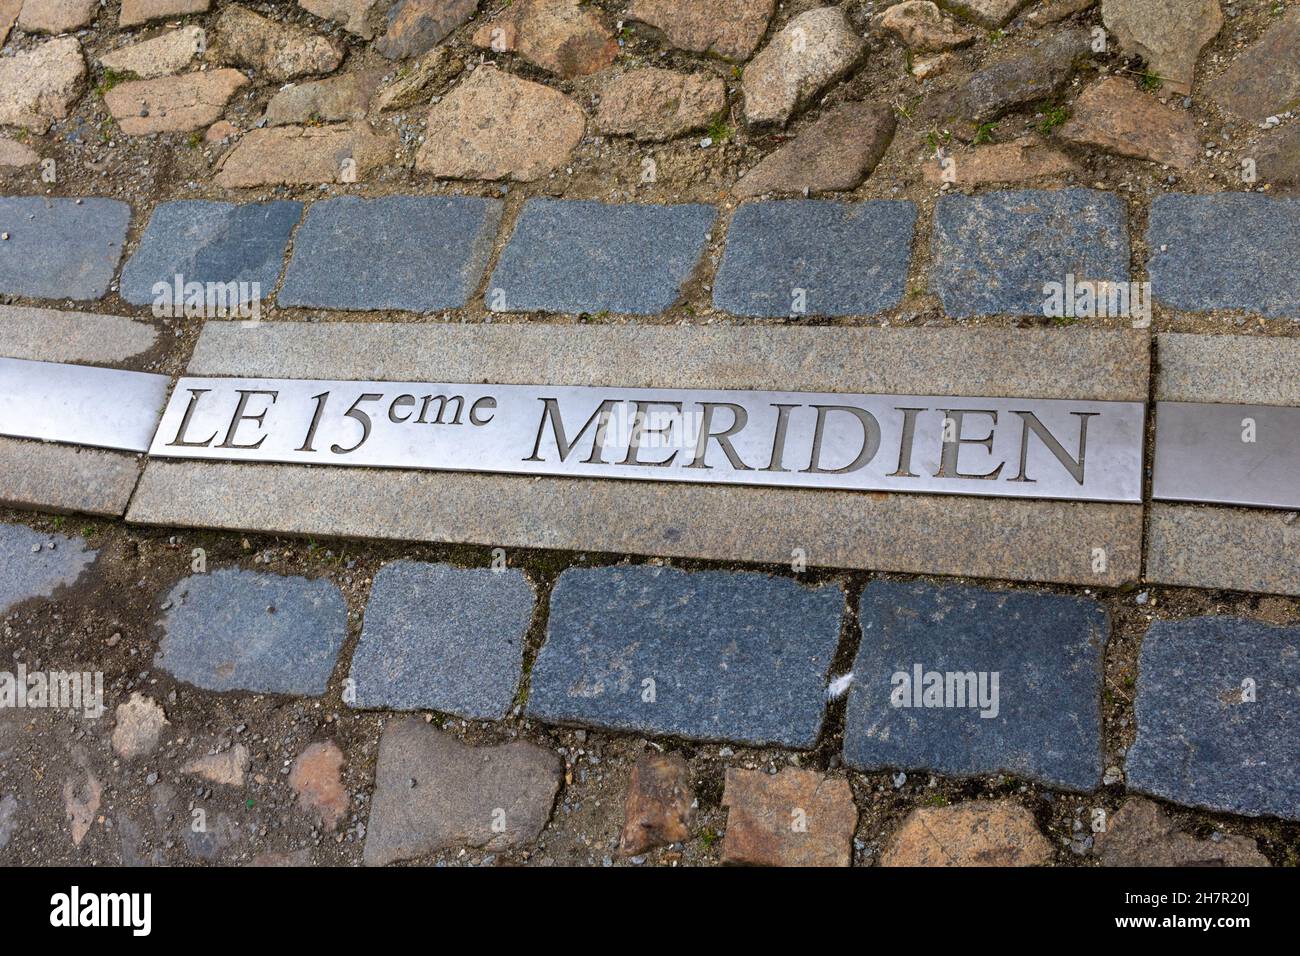 marker embedded in street pavement for the 15th meridian (Text in french translation) east longitude in the Czech town of jindrichuv Hradec. Stock Photo